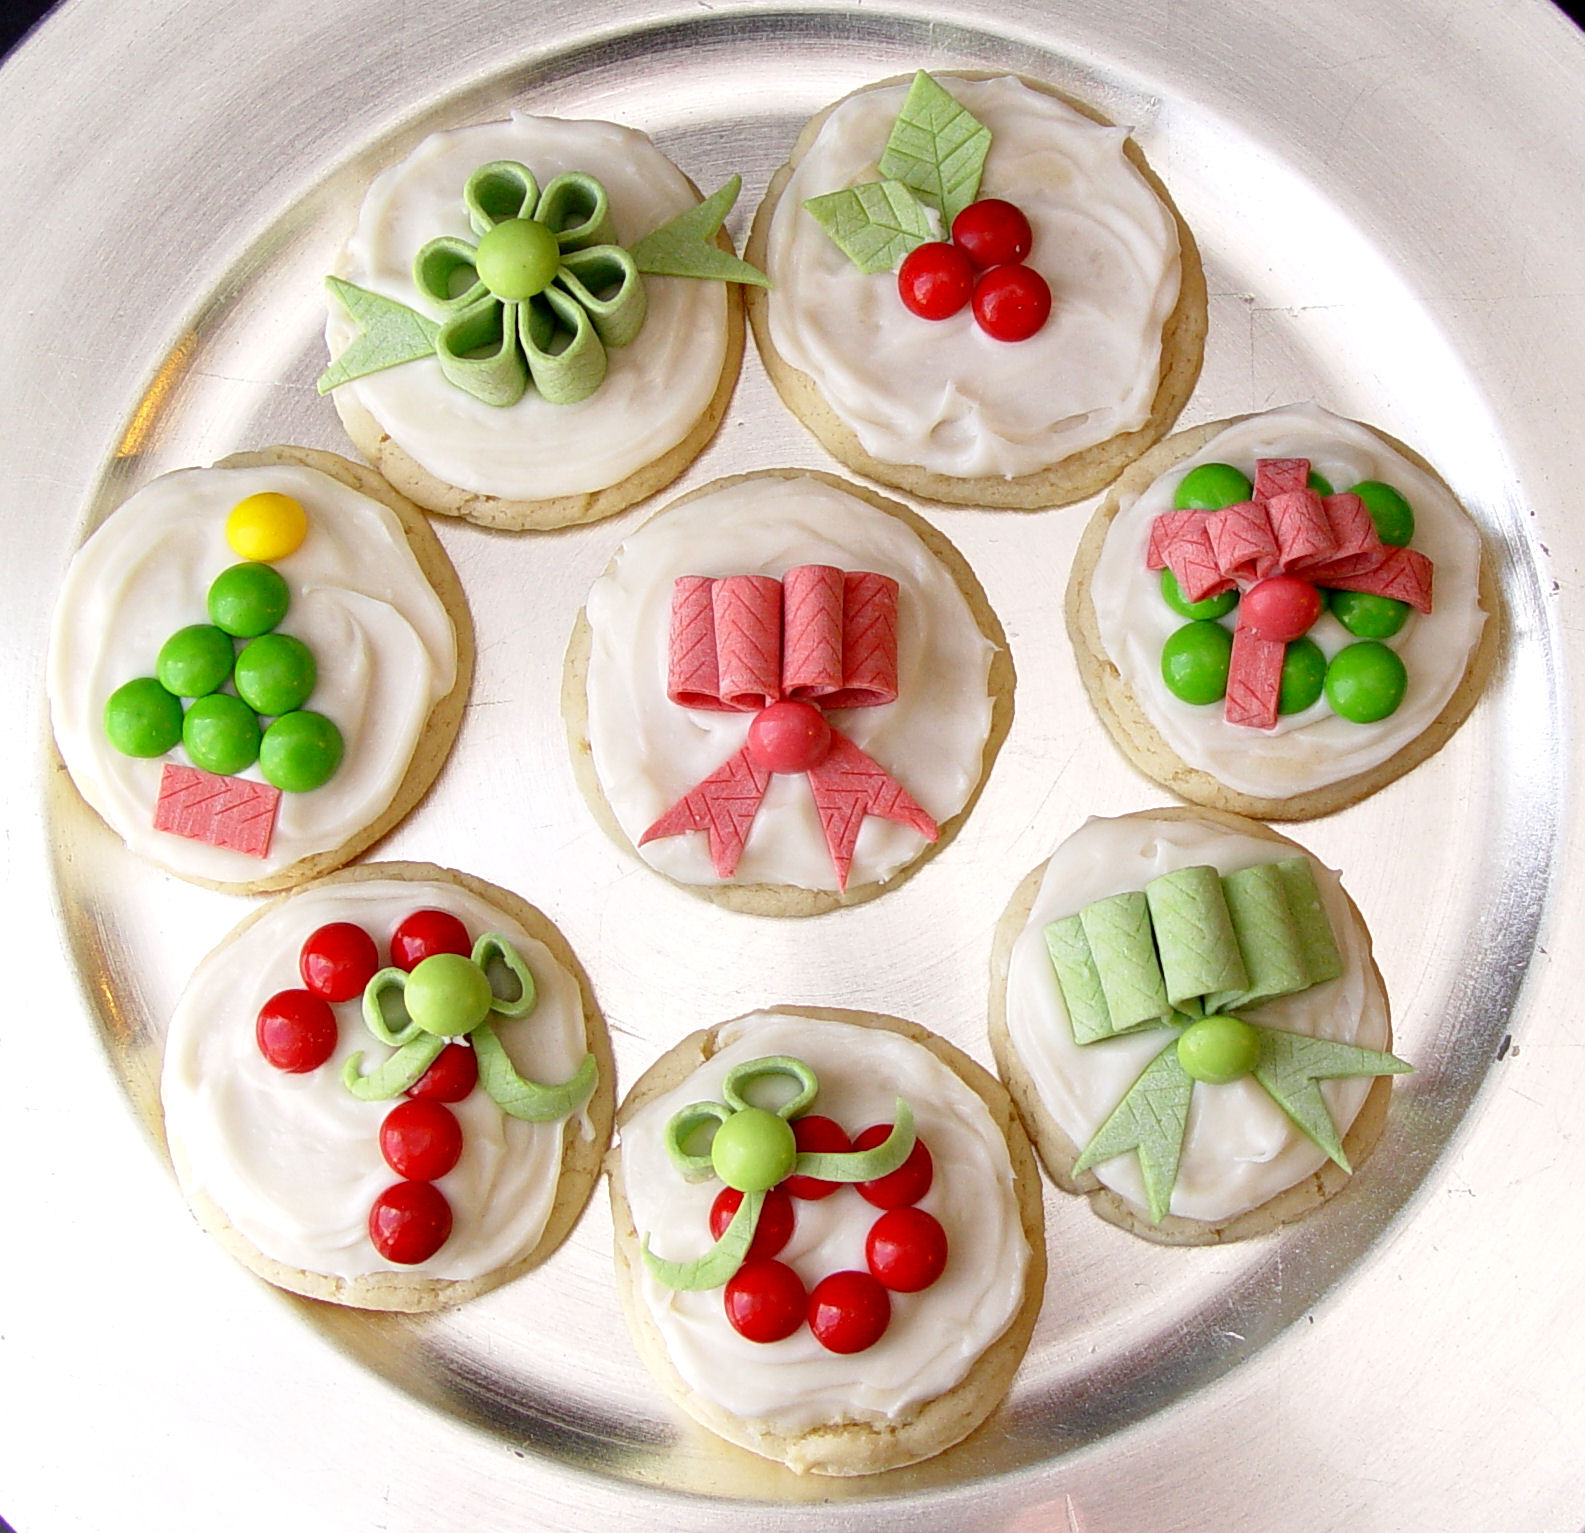 45 Top Photos Sugar Decorations For Cookies - A Royal-Icing Tutorial: Decorate Christmas Cookies Like a ...